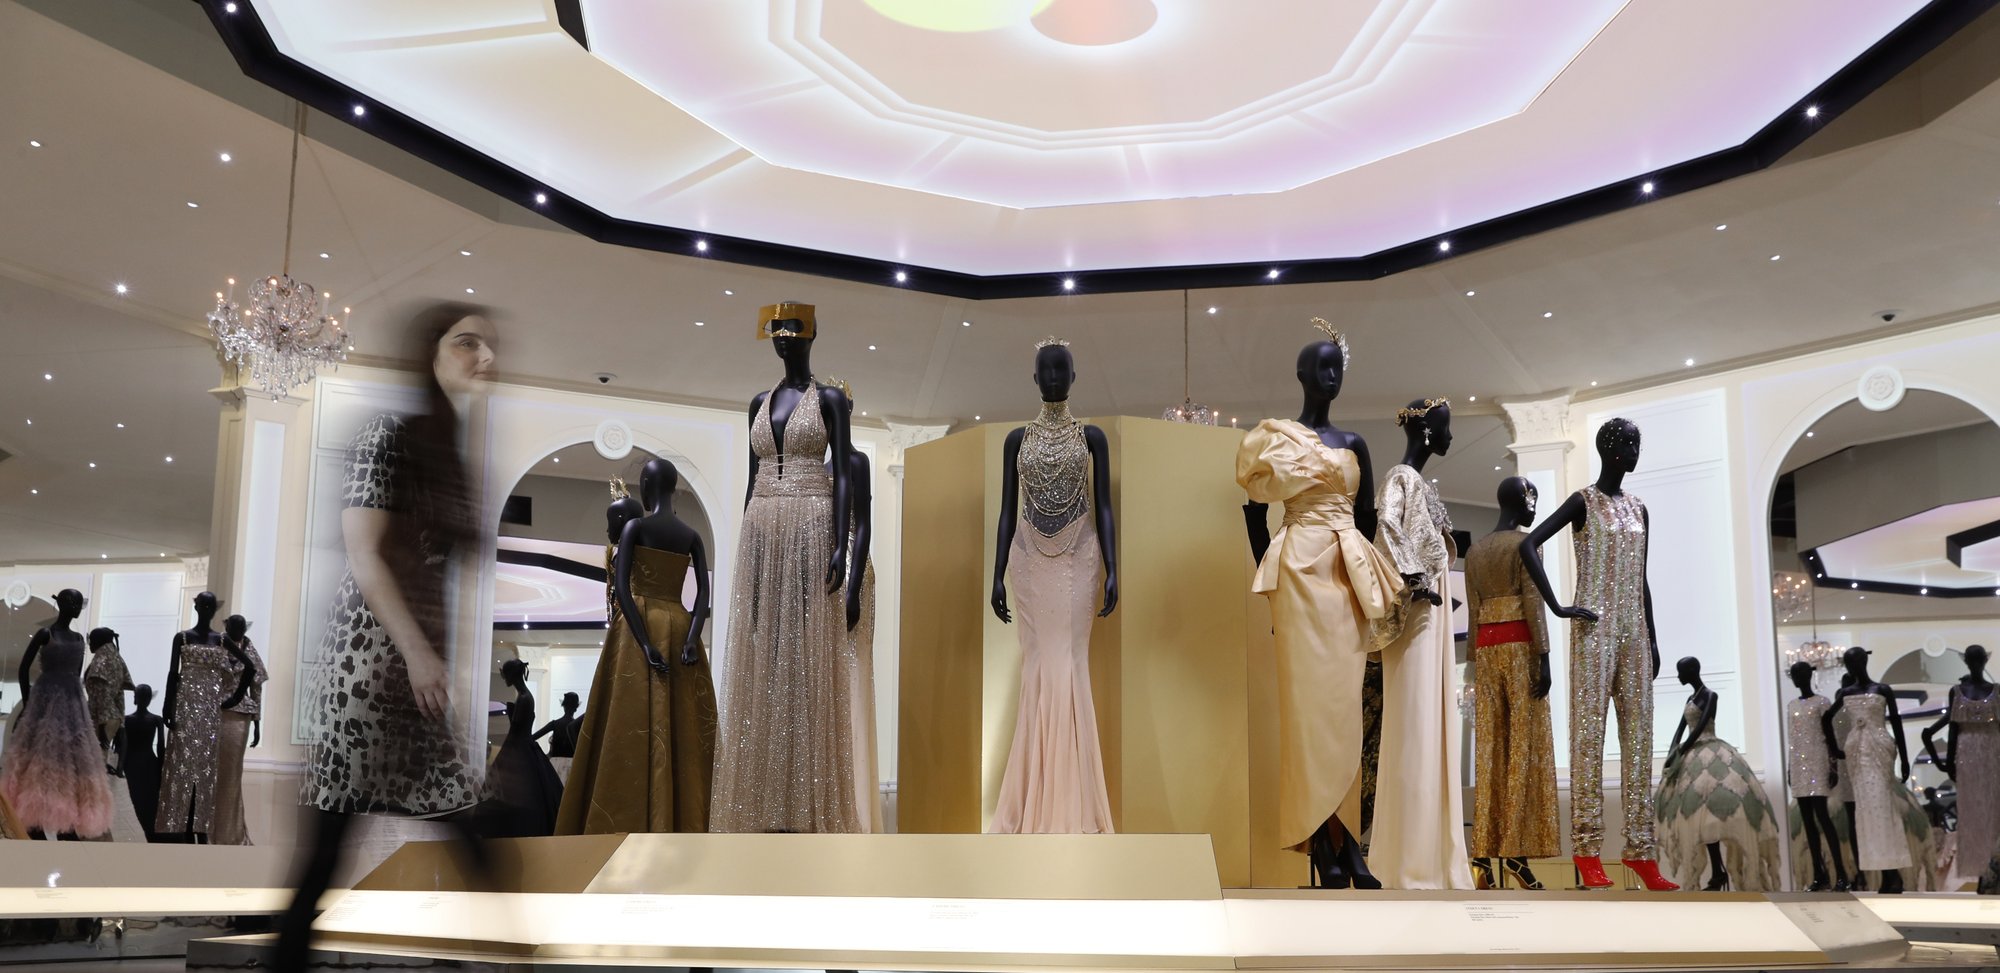 My City - Ball gowns galore: London’s V&A Museum stages new Dior show